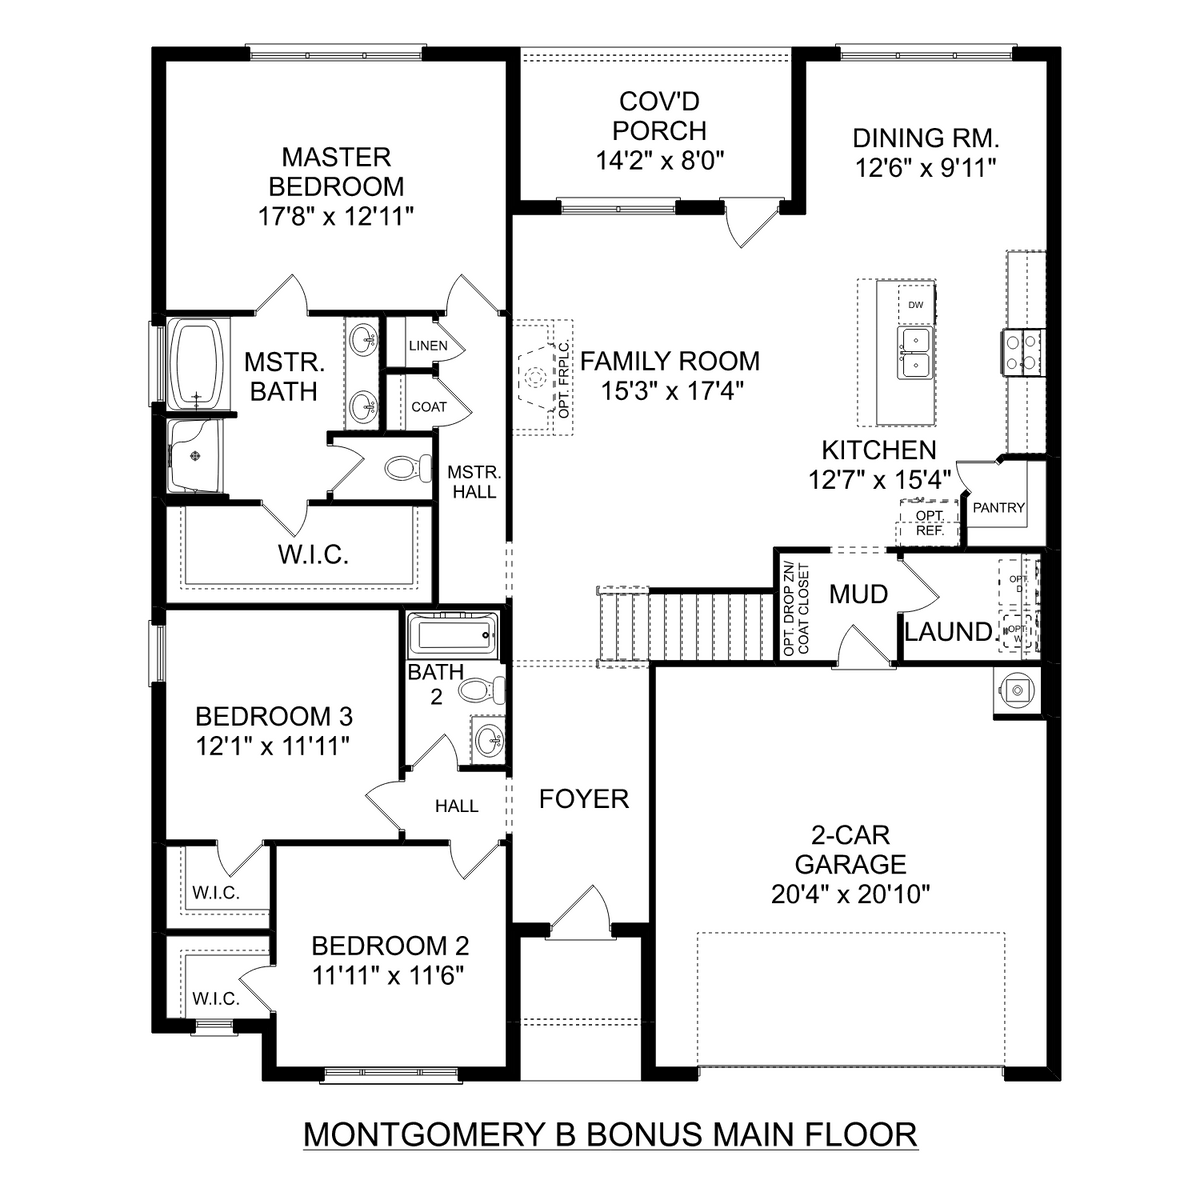 1 - The Montgomery B With Bonus floor plan layout for 111 Nellies Way in Davidson Homes' Pikes Ridge community.